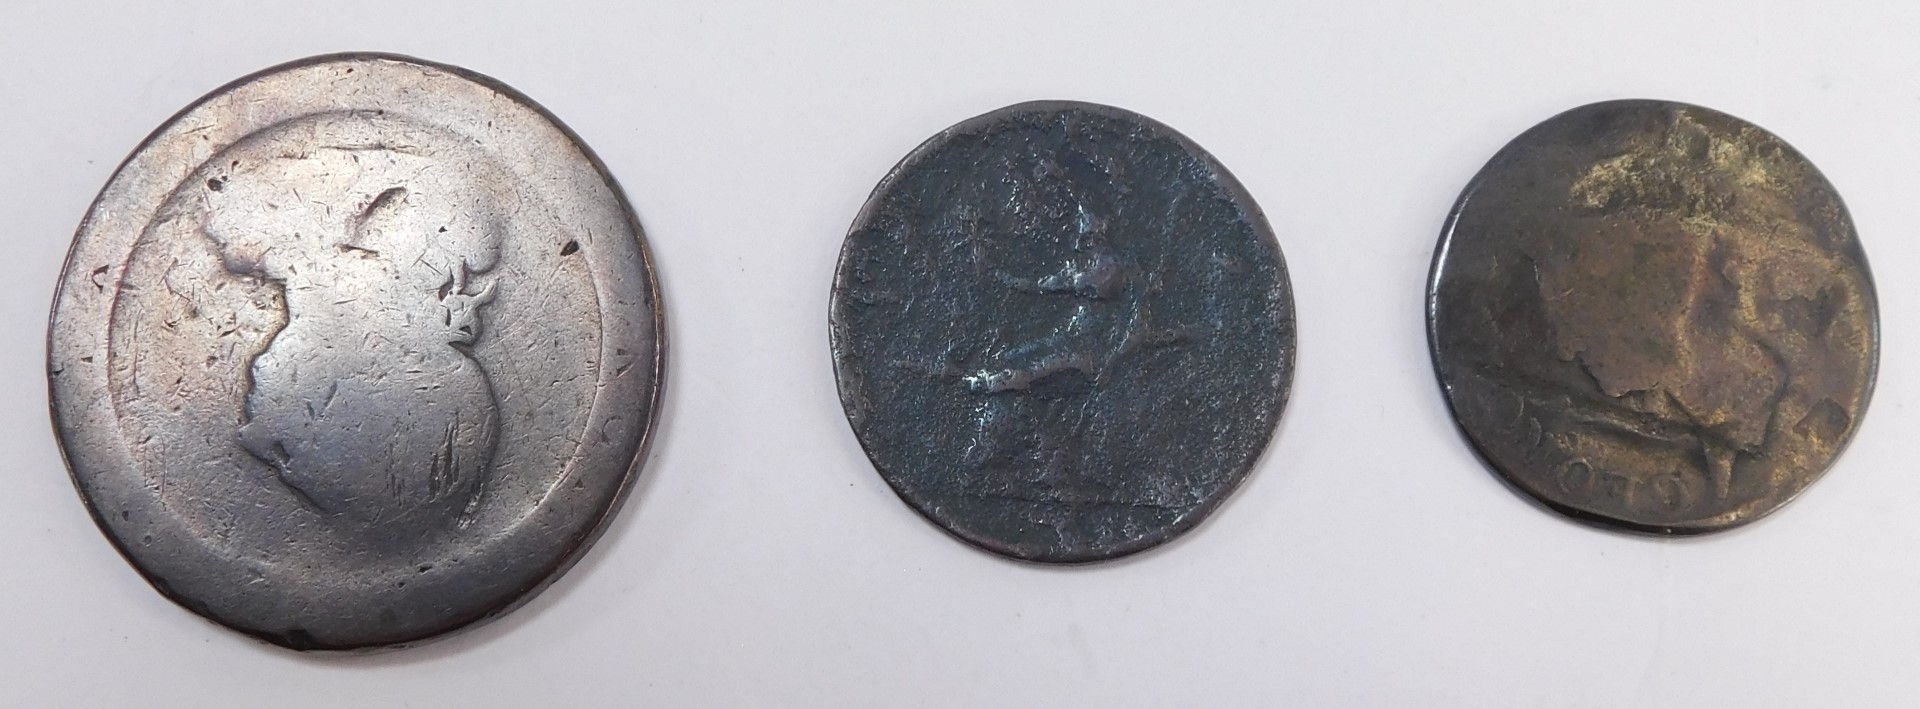 A George III cartwheel penny, two George III pennies, heavily rubbed, and a standard catalogue of - Image 2 of 4